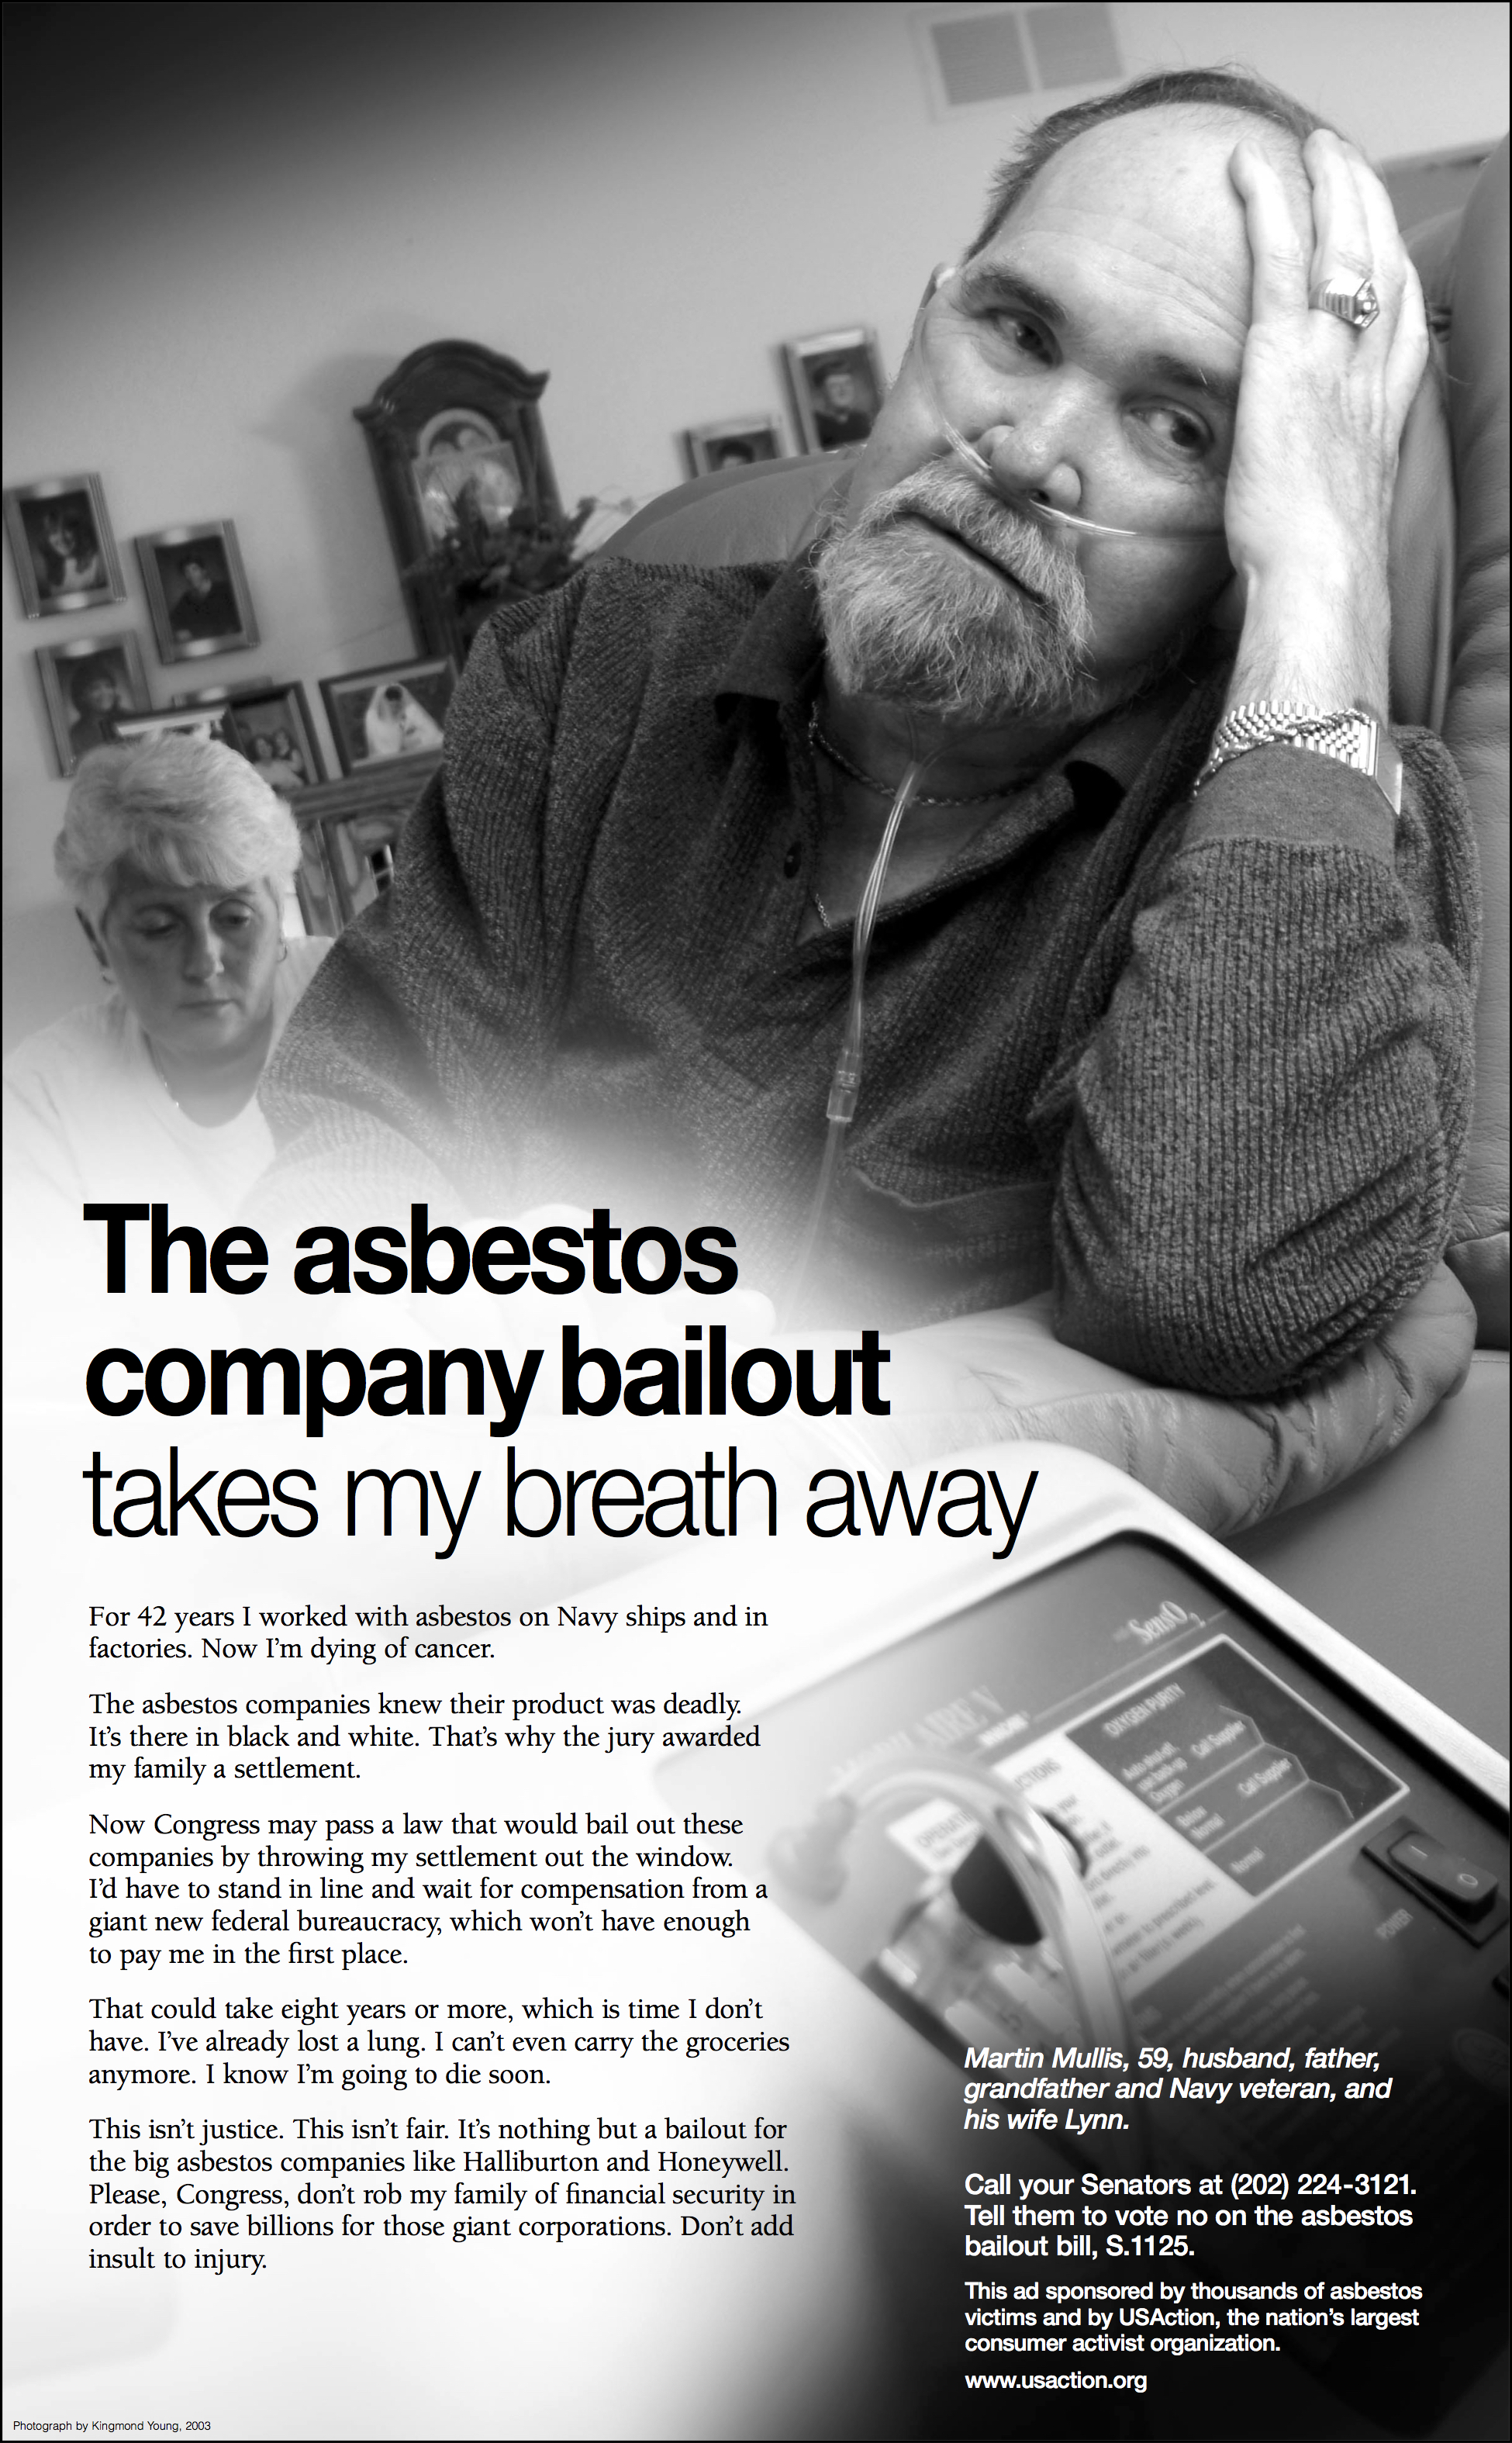   One in a series of ads featuring workers who contracted mesothelioma from asbestos on the job.&nbsp;S.1125 was in fact defeated. Client: USAction. Copy and creative direction by Art Silverman. Headline by Pacy Markman. Art's work via Fenton  